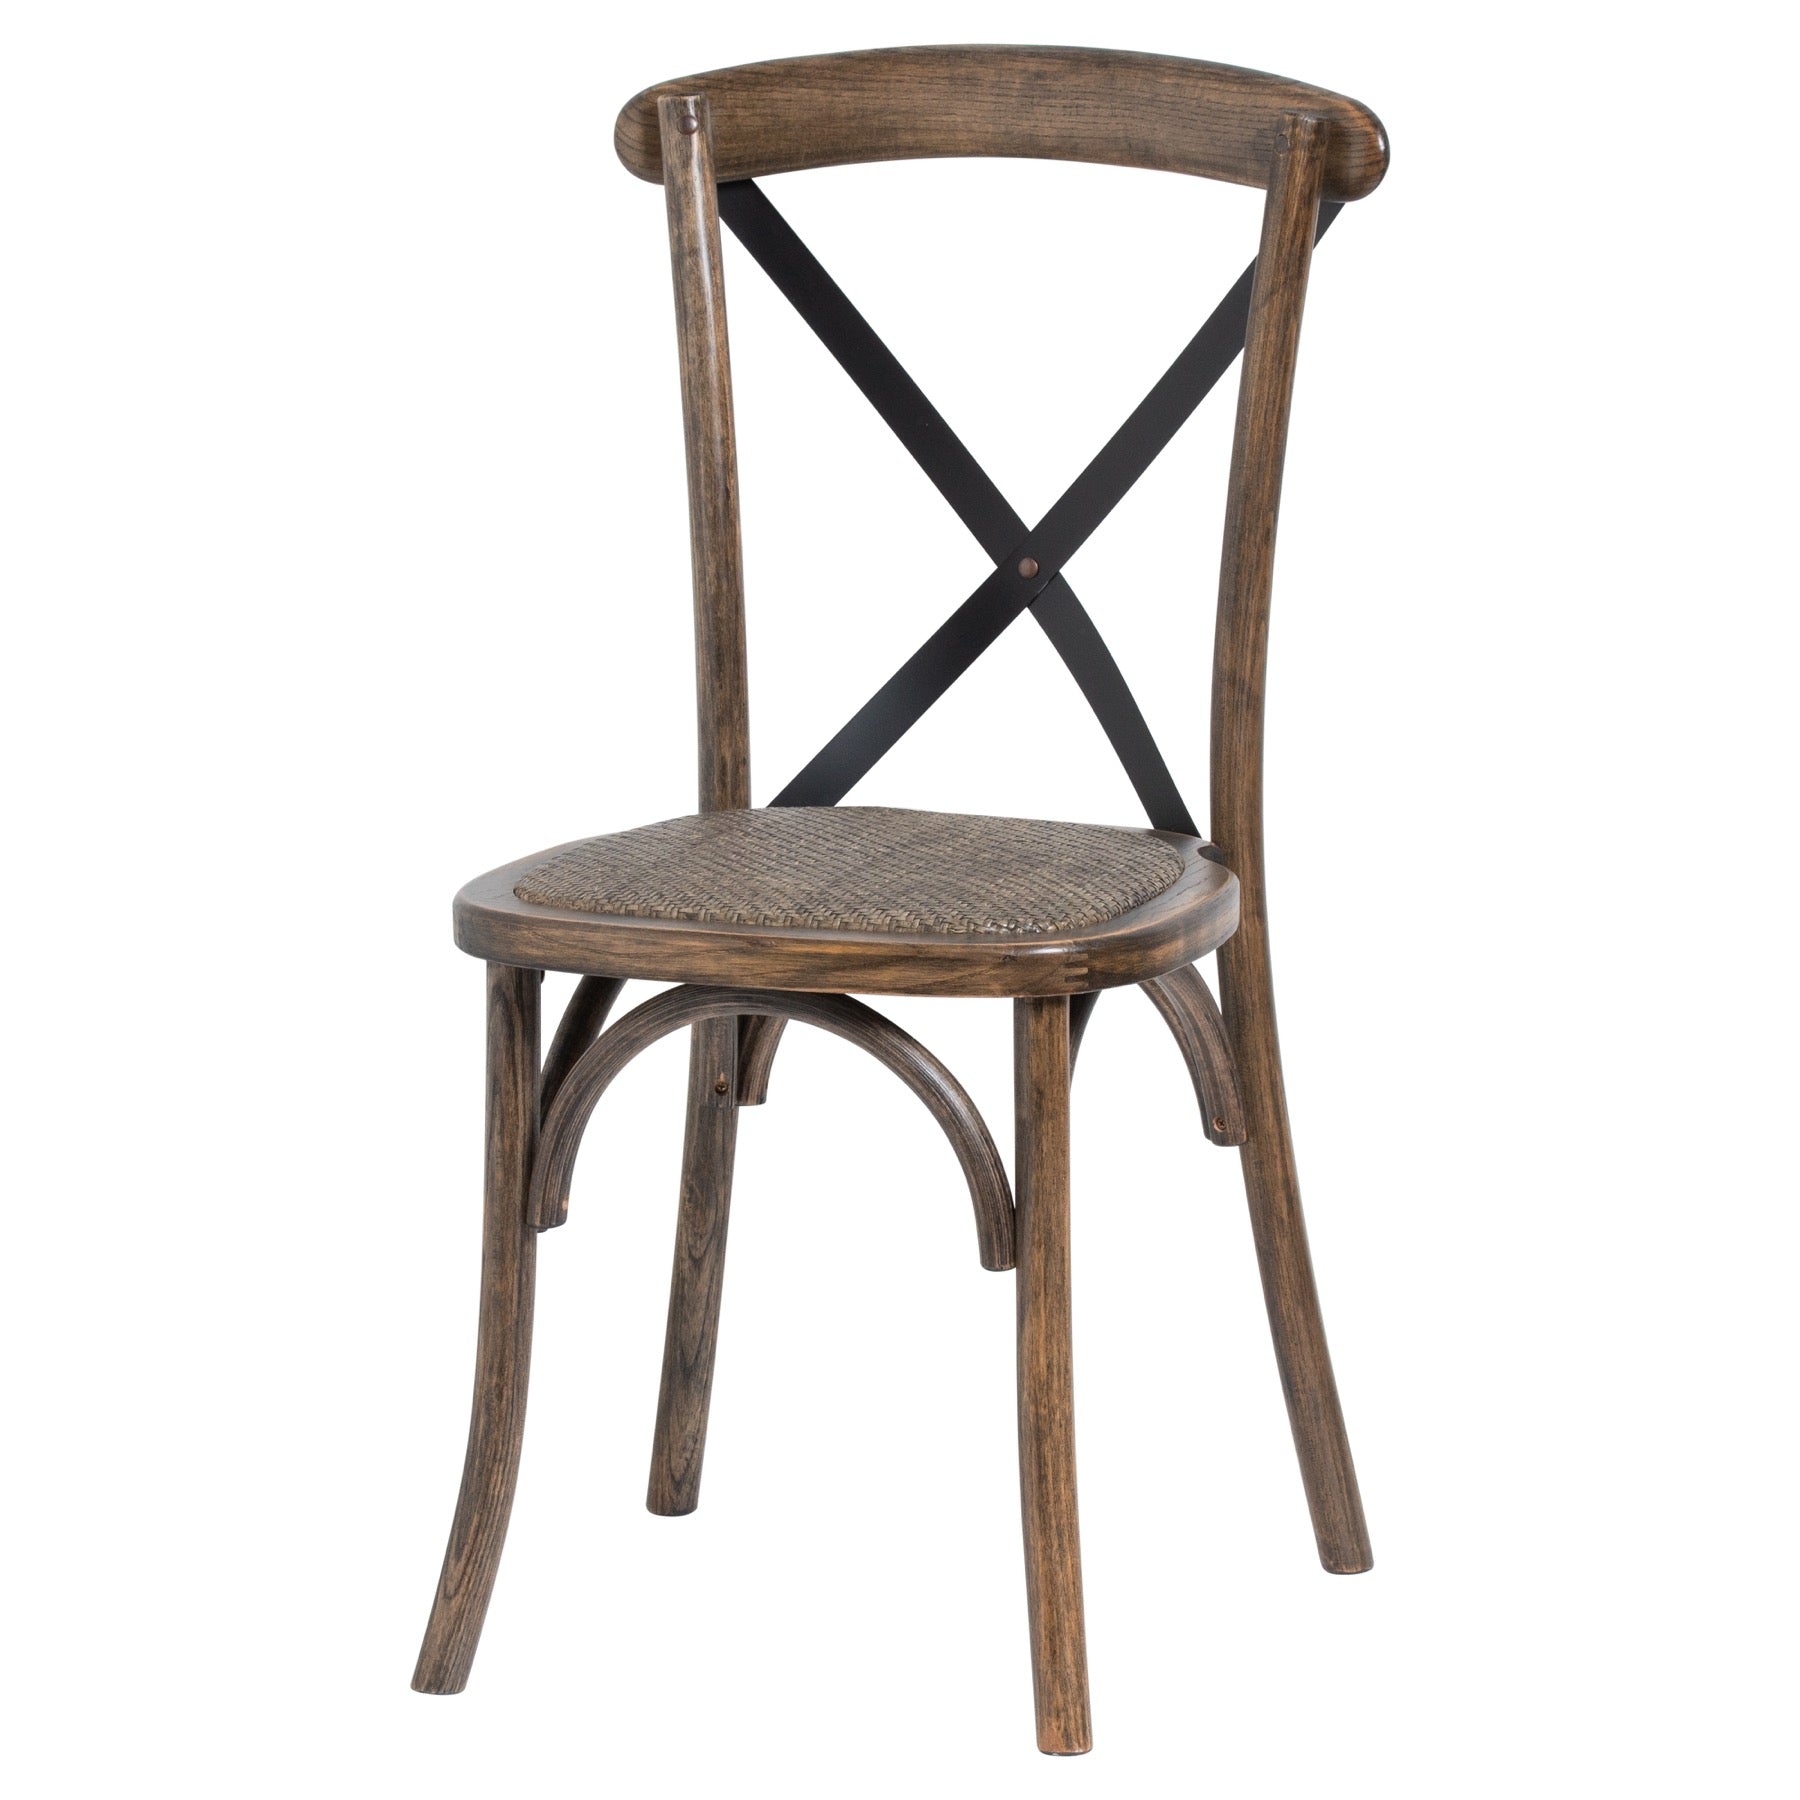 View Cross Back Dining Chair information